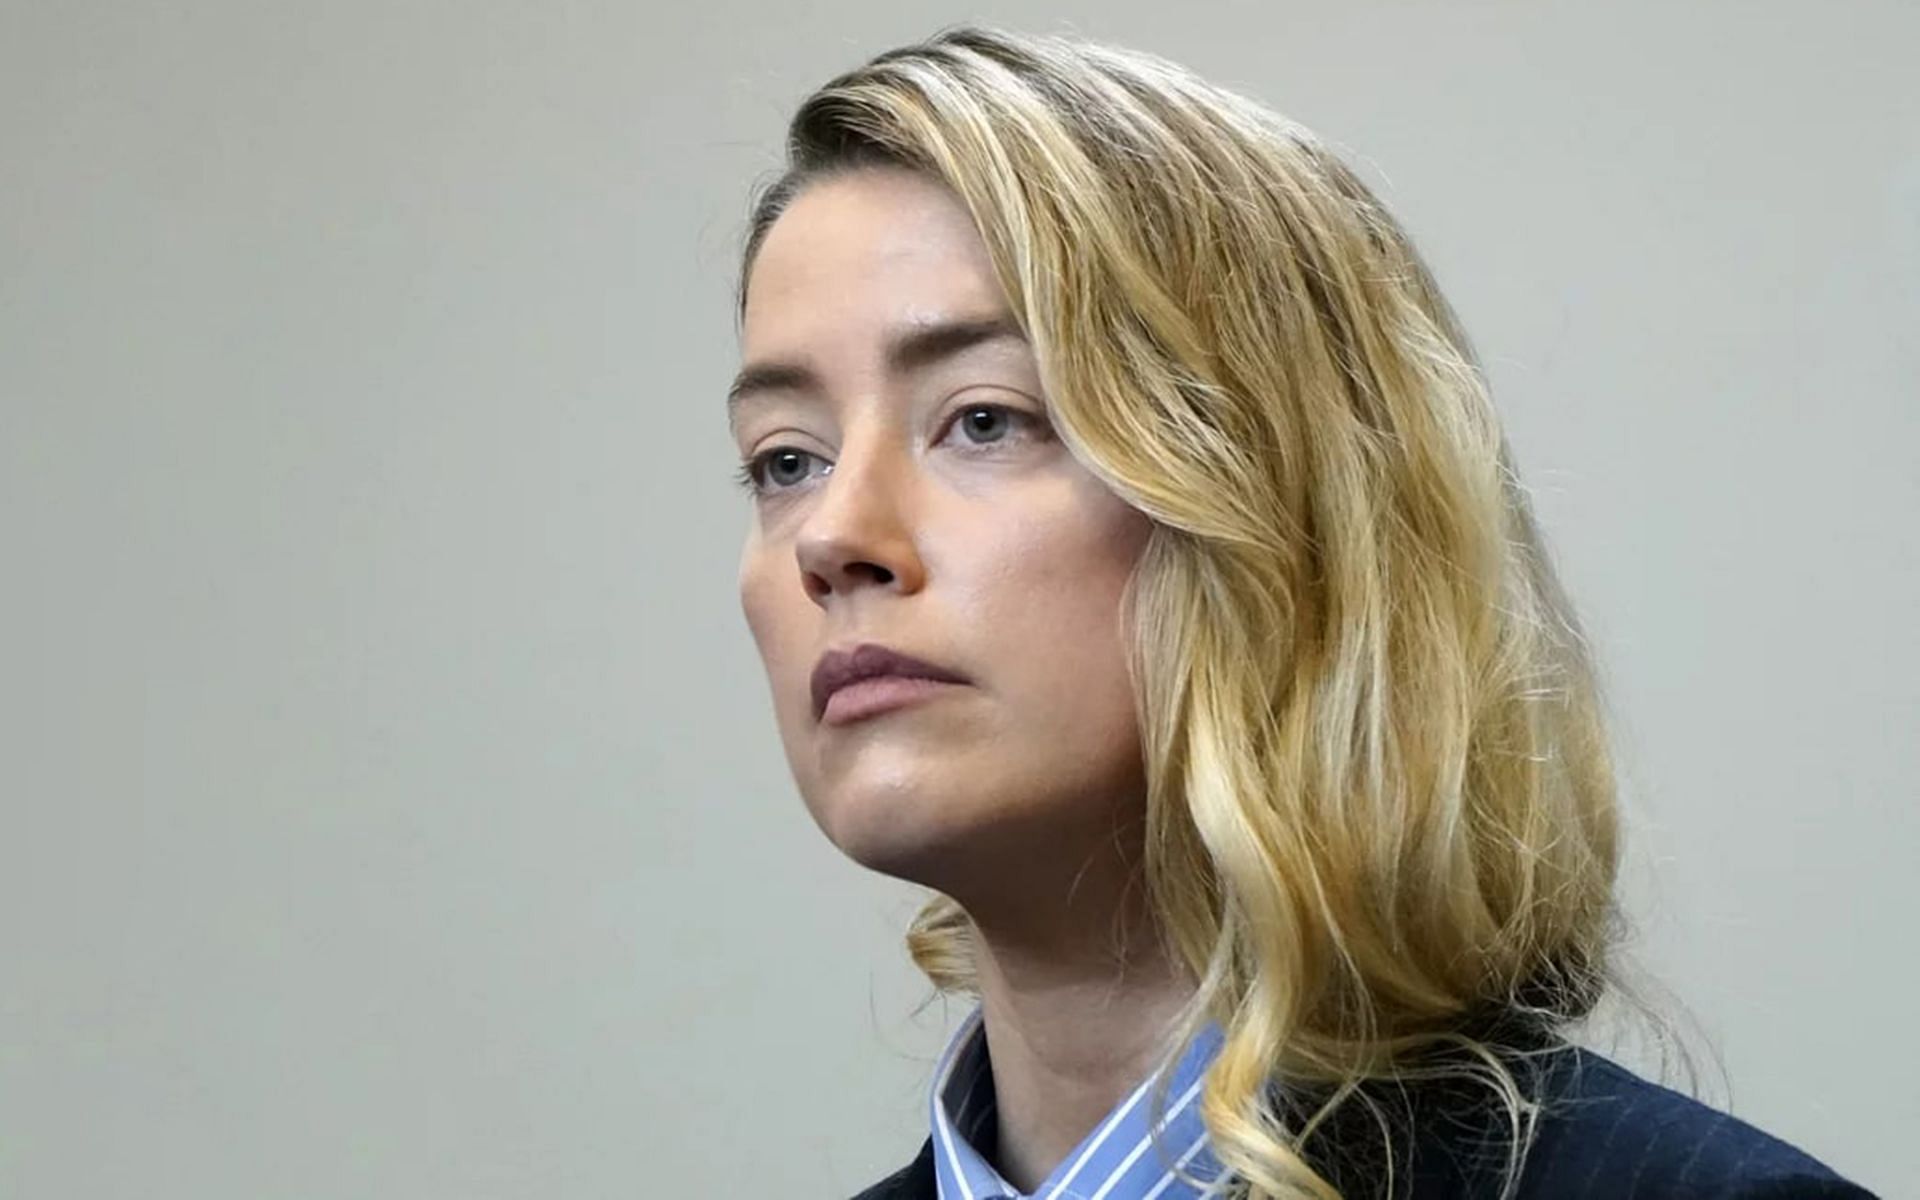 Amber Heard&#039;s PTSD has been widely debated (Image via Getty)